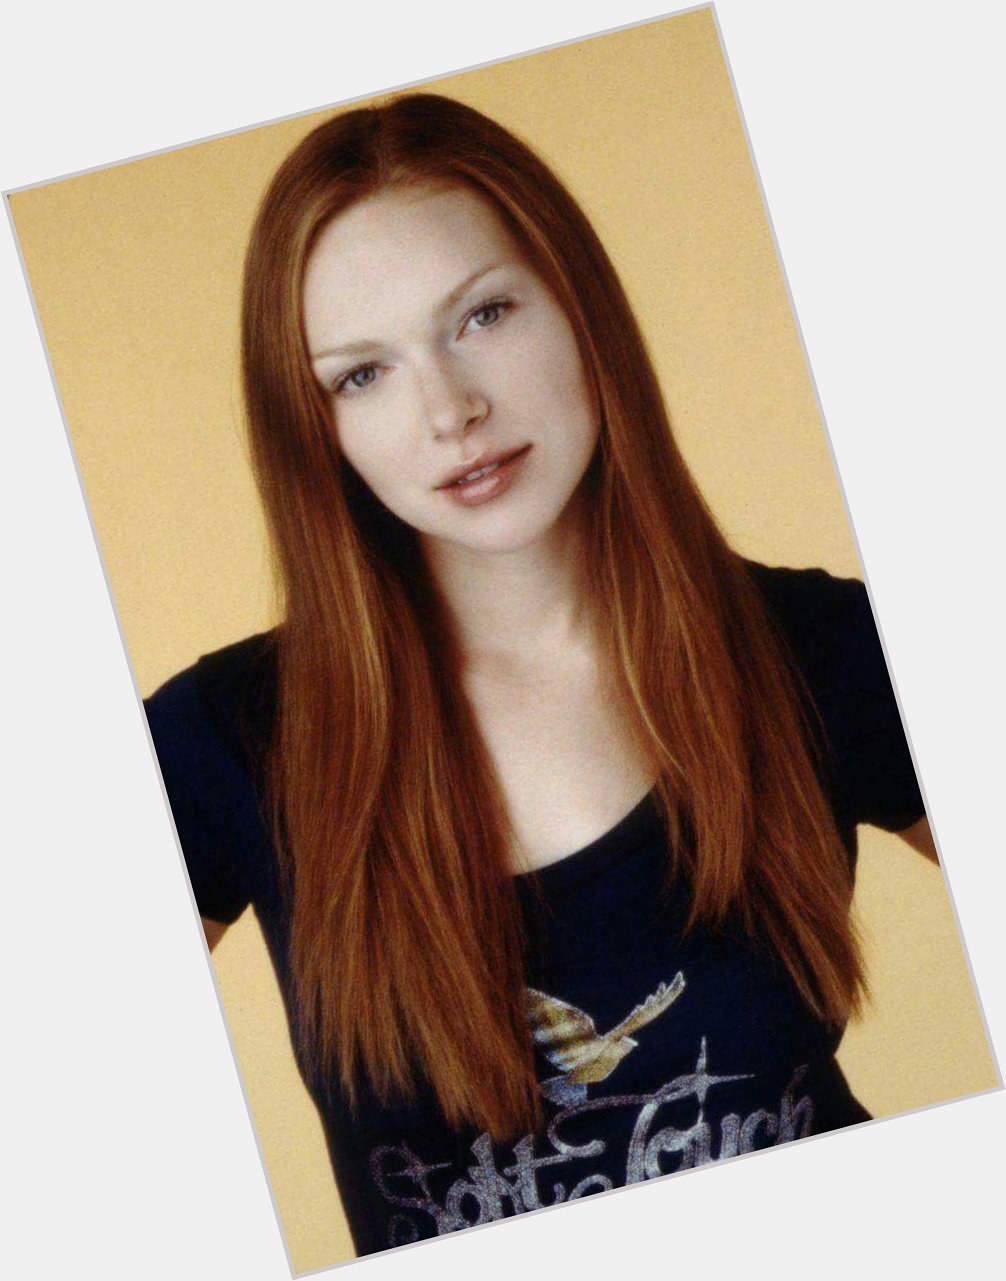 Wishing a happy 37th birthday today to Laura Prepon! 